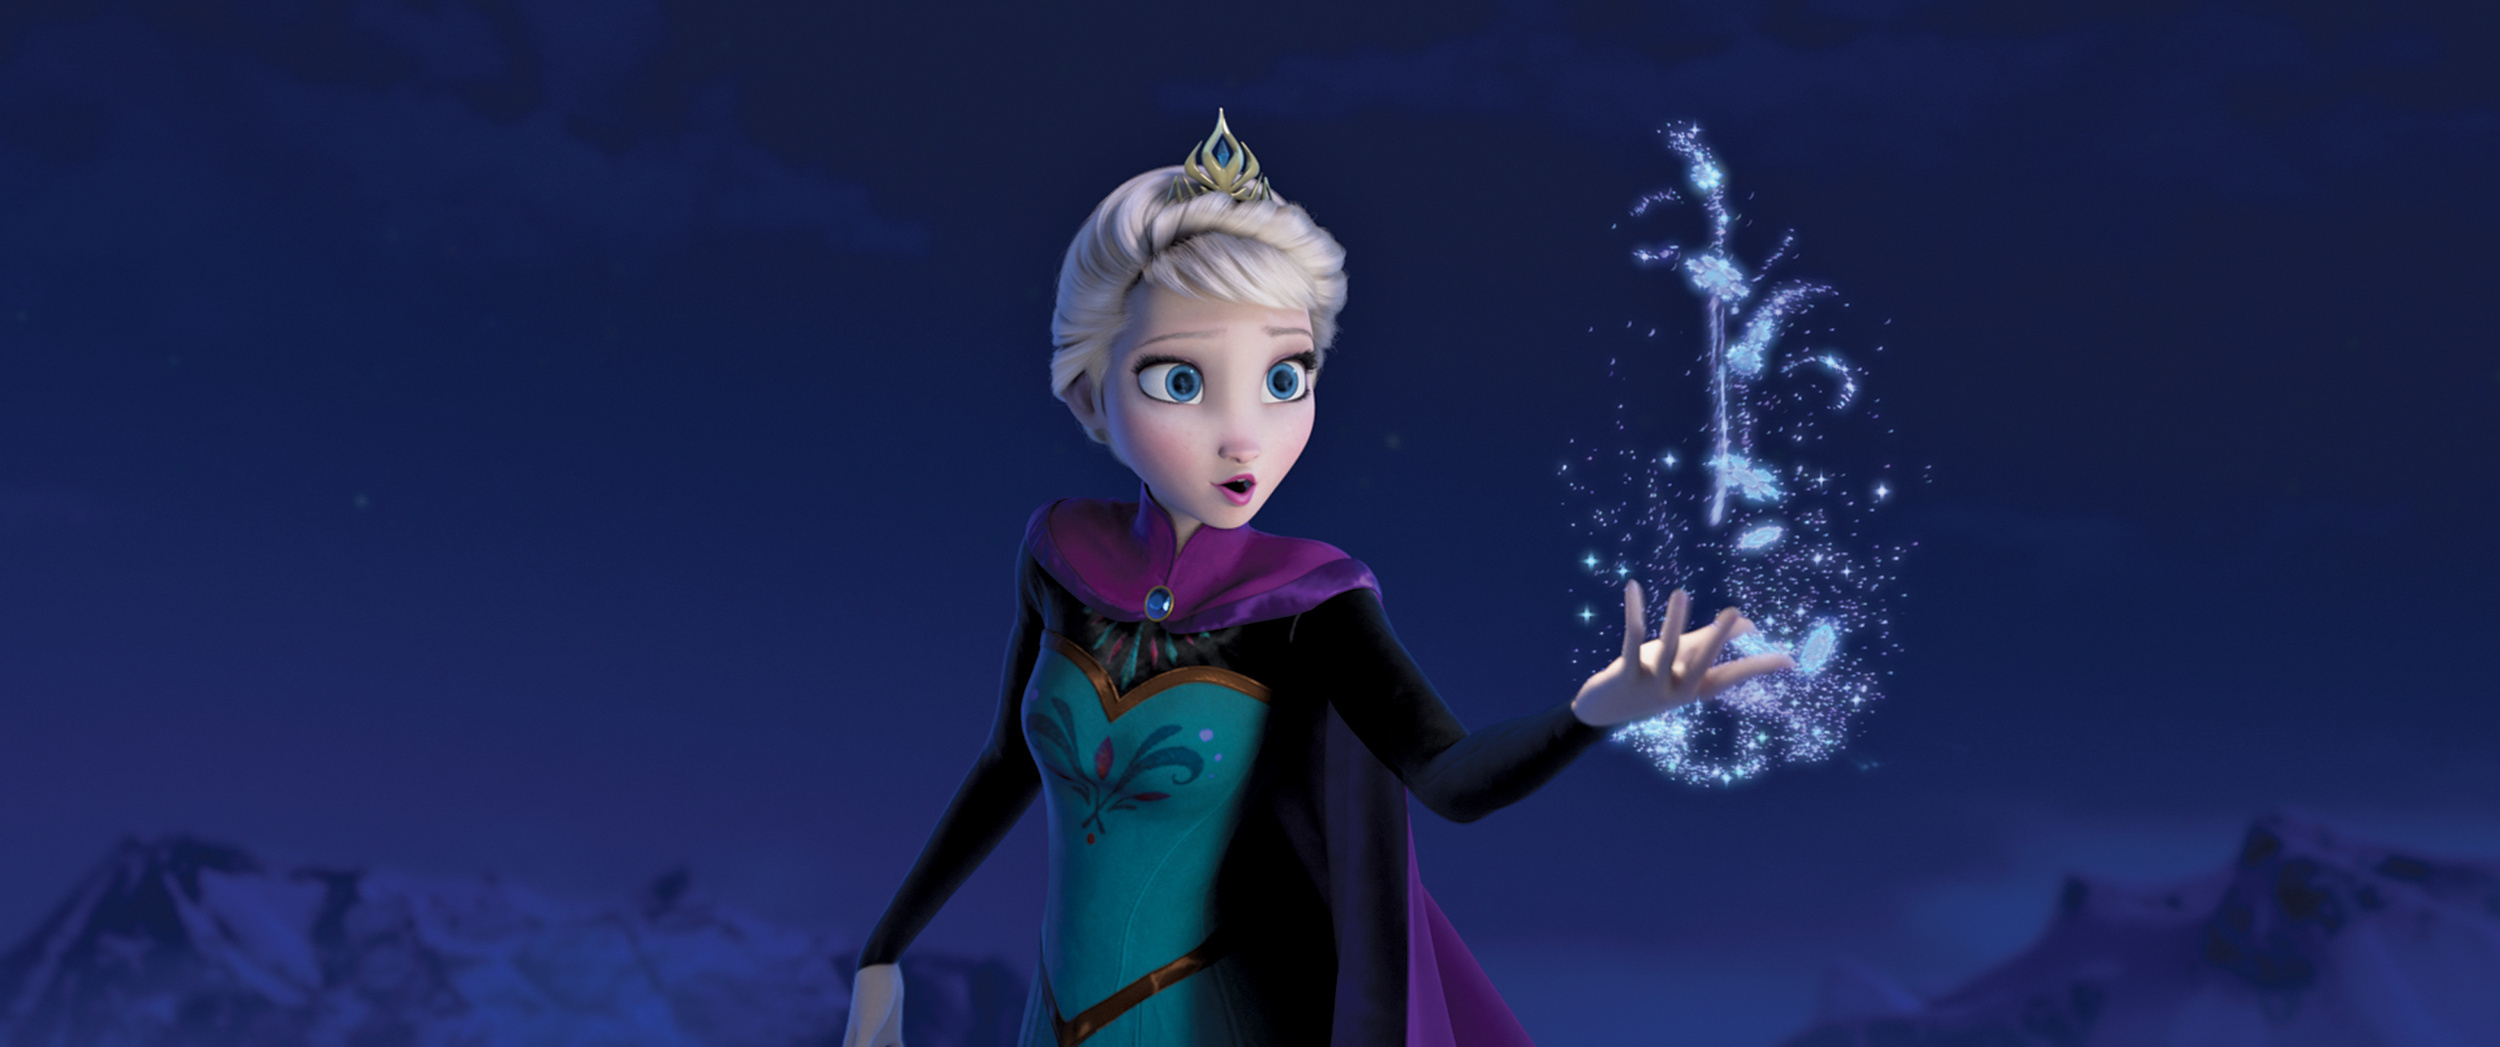 <p><span>Almost every character in 2013’s <em>Frozen</em> is beloved, but Elsa does have that extra something special about her that makes her a true queen.</span></p><p>You may also like: <a href='https://www.yardbarker.com/entertainment/articles/the_films_of_martin_scorsese_ranked_110923/s1__33857114'>The films of Martin Scorsese, ranked</a></p>